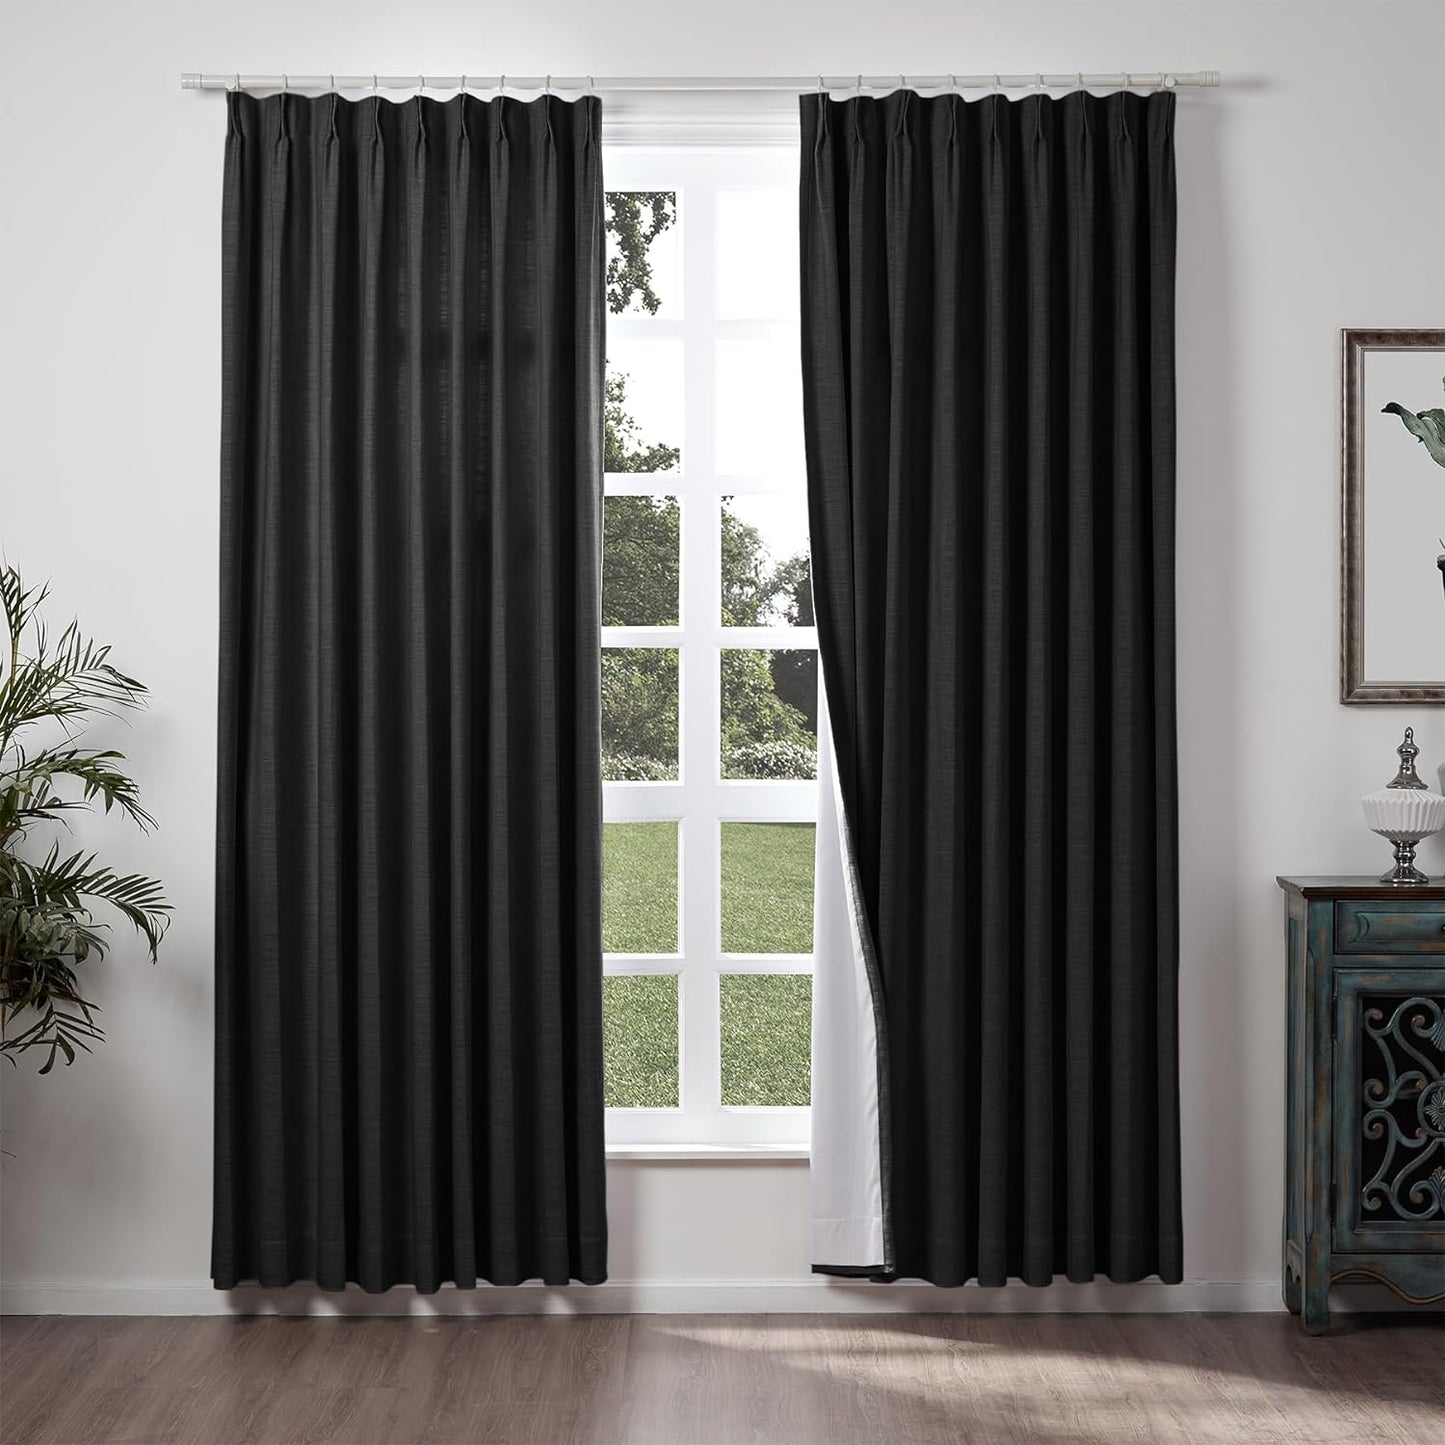 Chadmade 50" W X 84" L Polyester Linen Drape with Blackout Lining Pinch Pleat Curtain for Sliding Door Patio Door Living Room Bedroom, (1 Panel) Beige White Liz Collection  ChadMade Black(37) 72Wx84L 